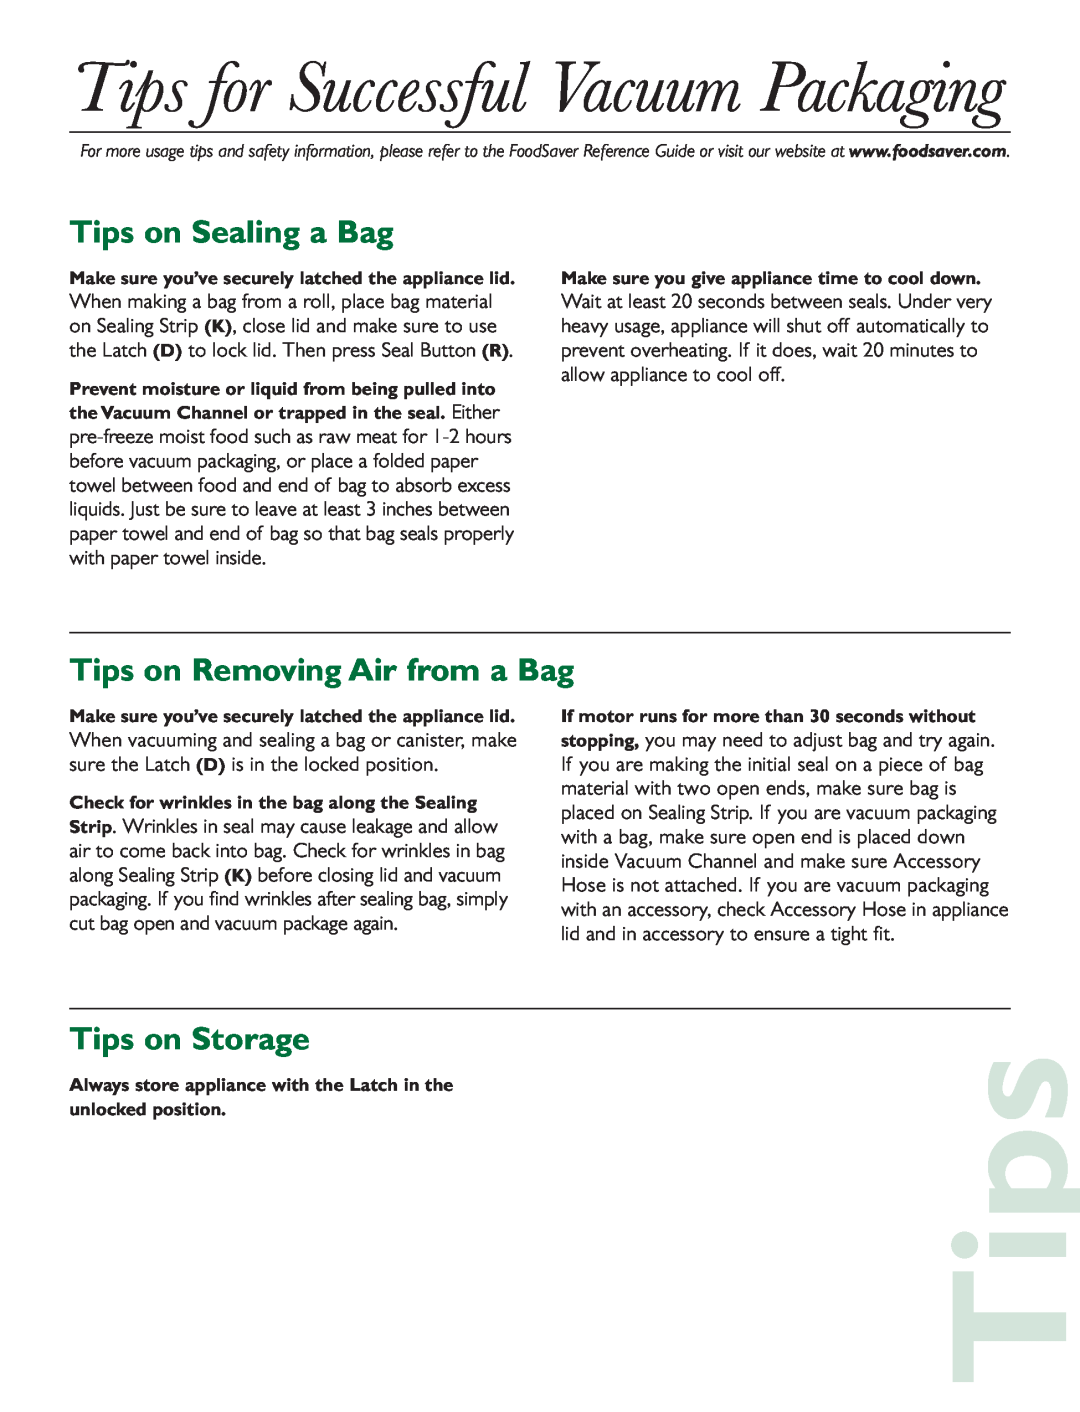 FoodSaver V2460, V2420 Tips for Successful Vacuum Packaging, Tips on Sealing a Bag, Tips on Removing Air from a Bag 